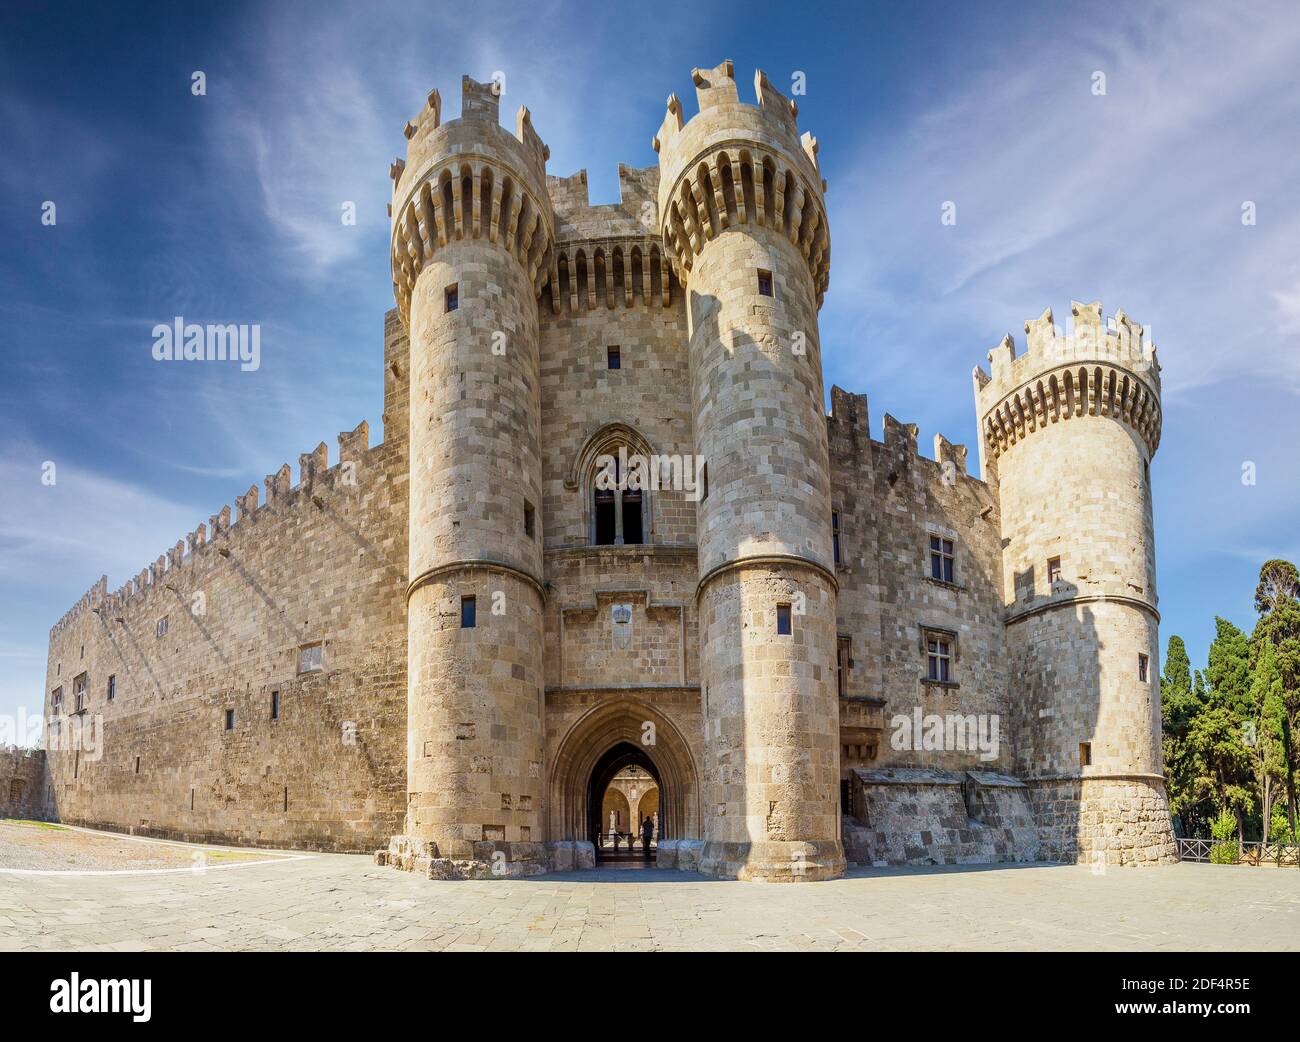 Palace of the Grand Master of the Knights of Rhodes - Wikipedia